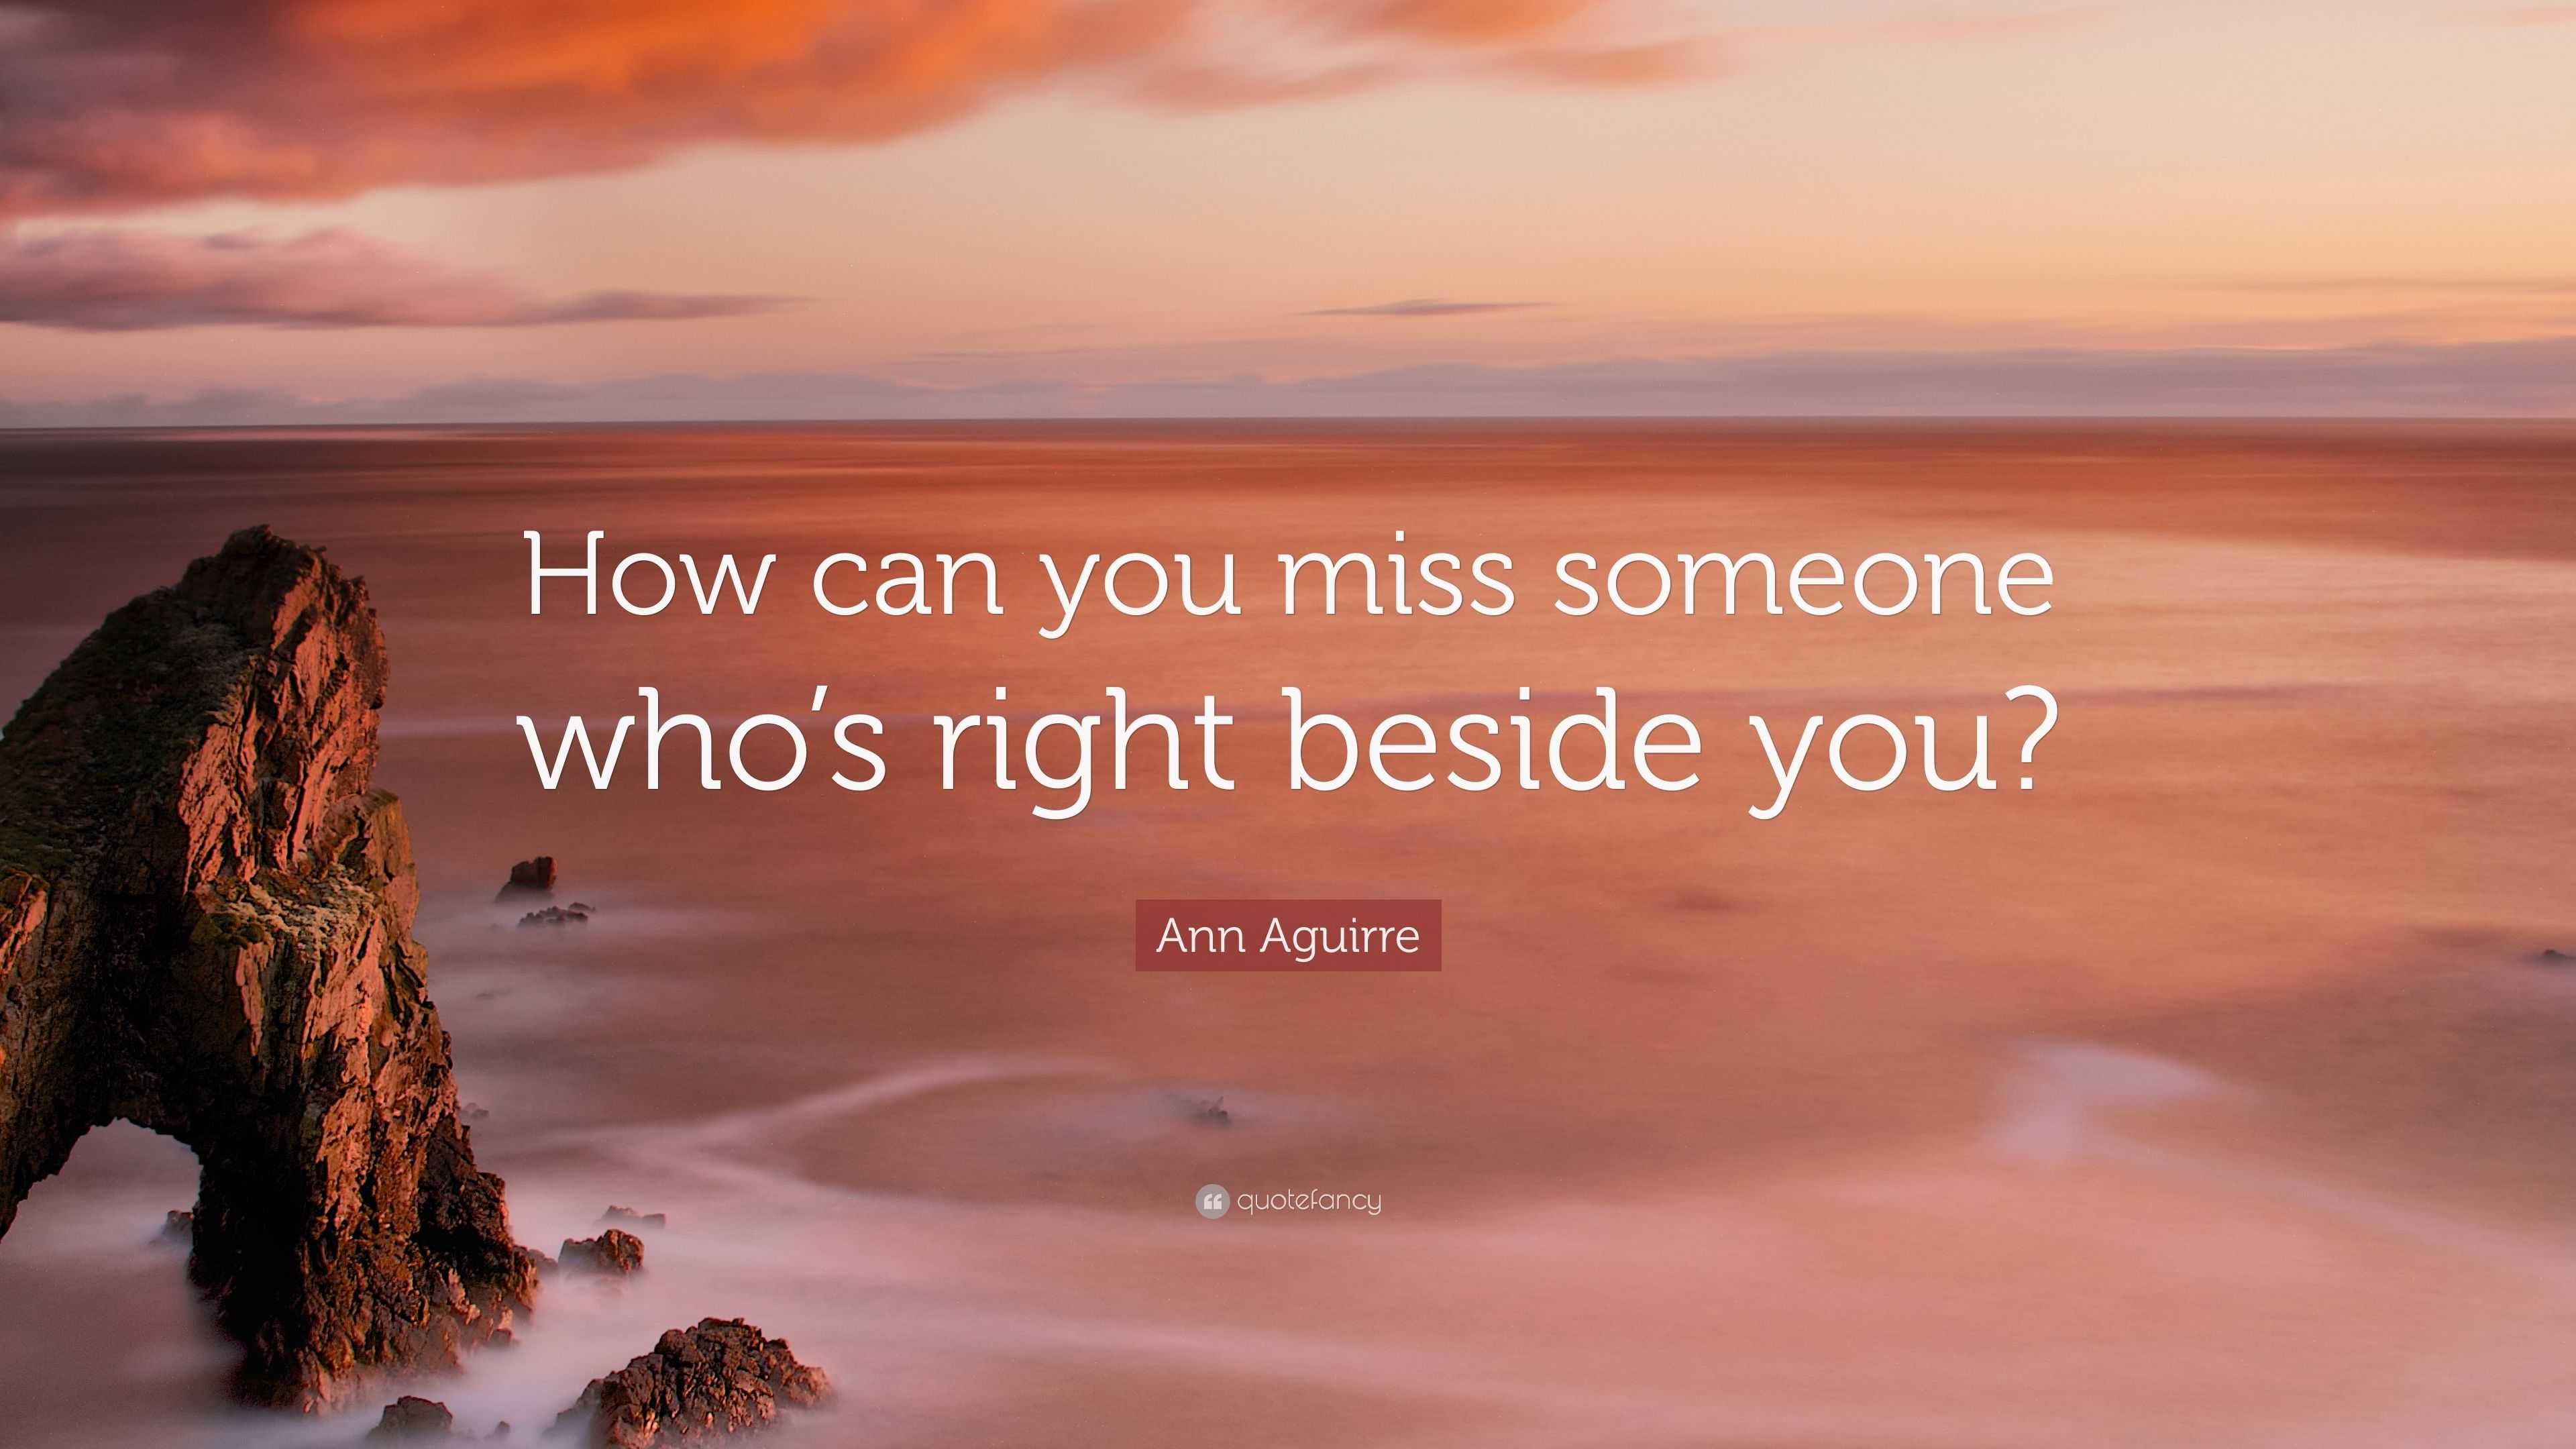 Ann Aguirre Quote “How can you miss someone who’s right beside you?”